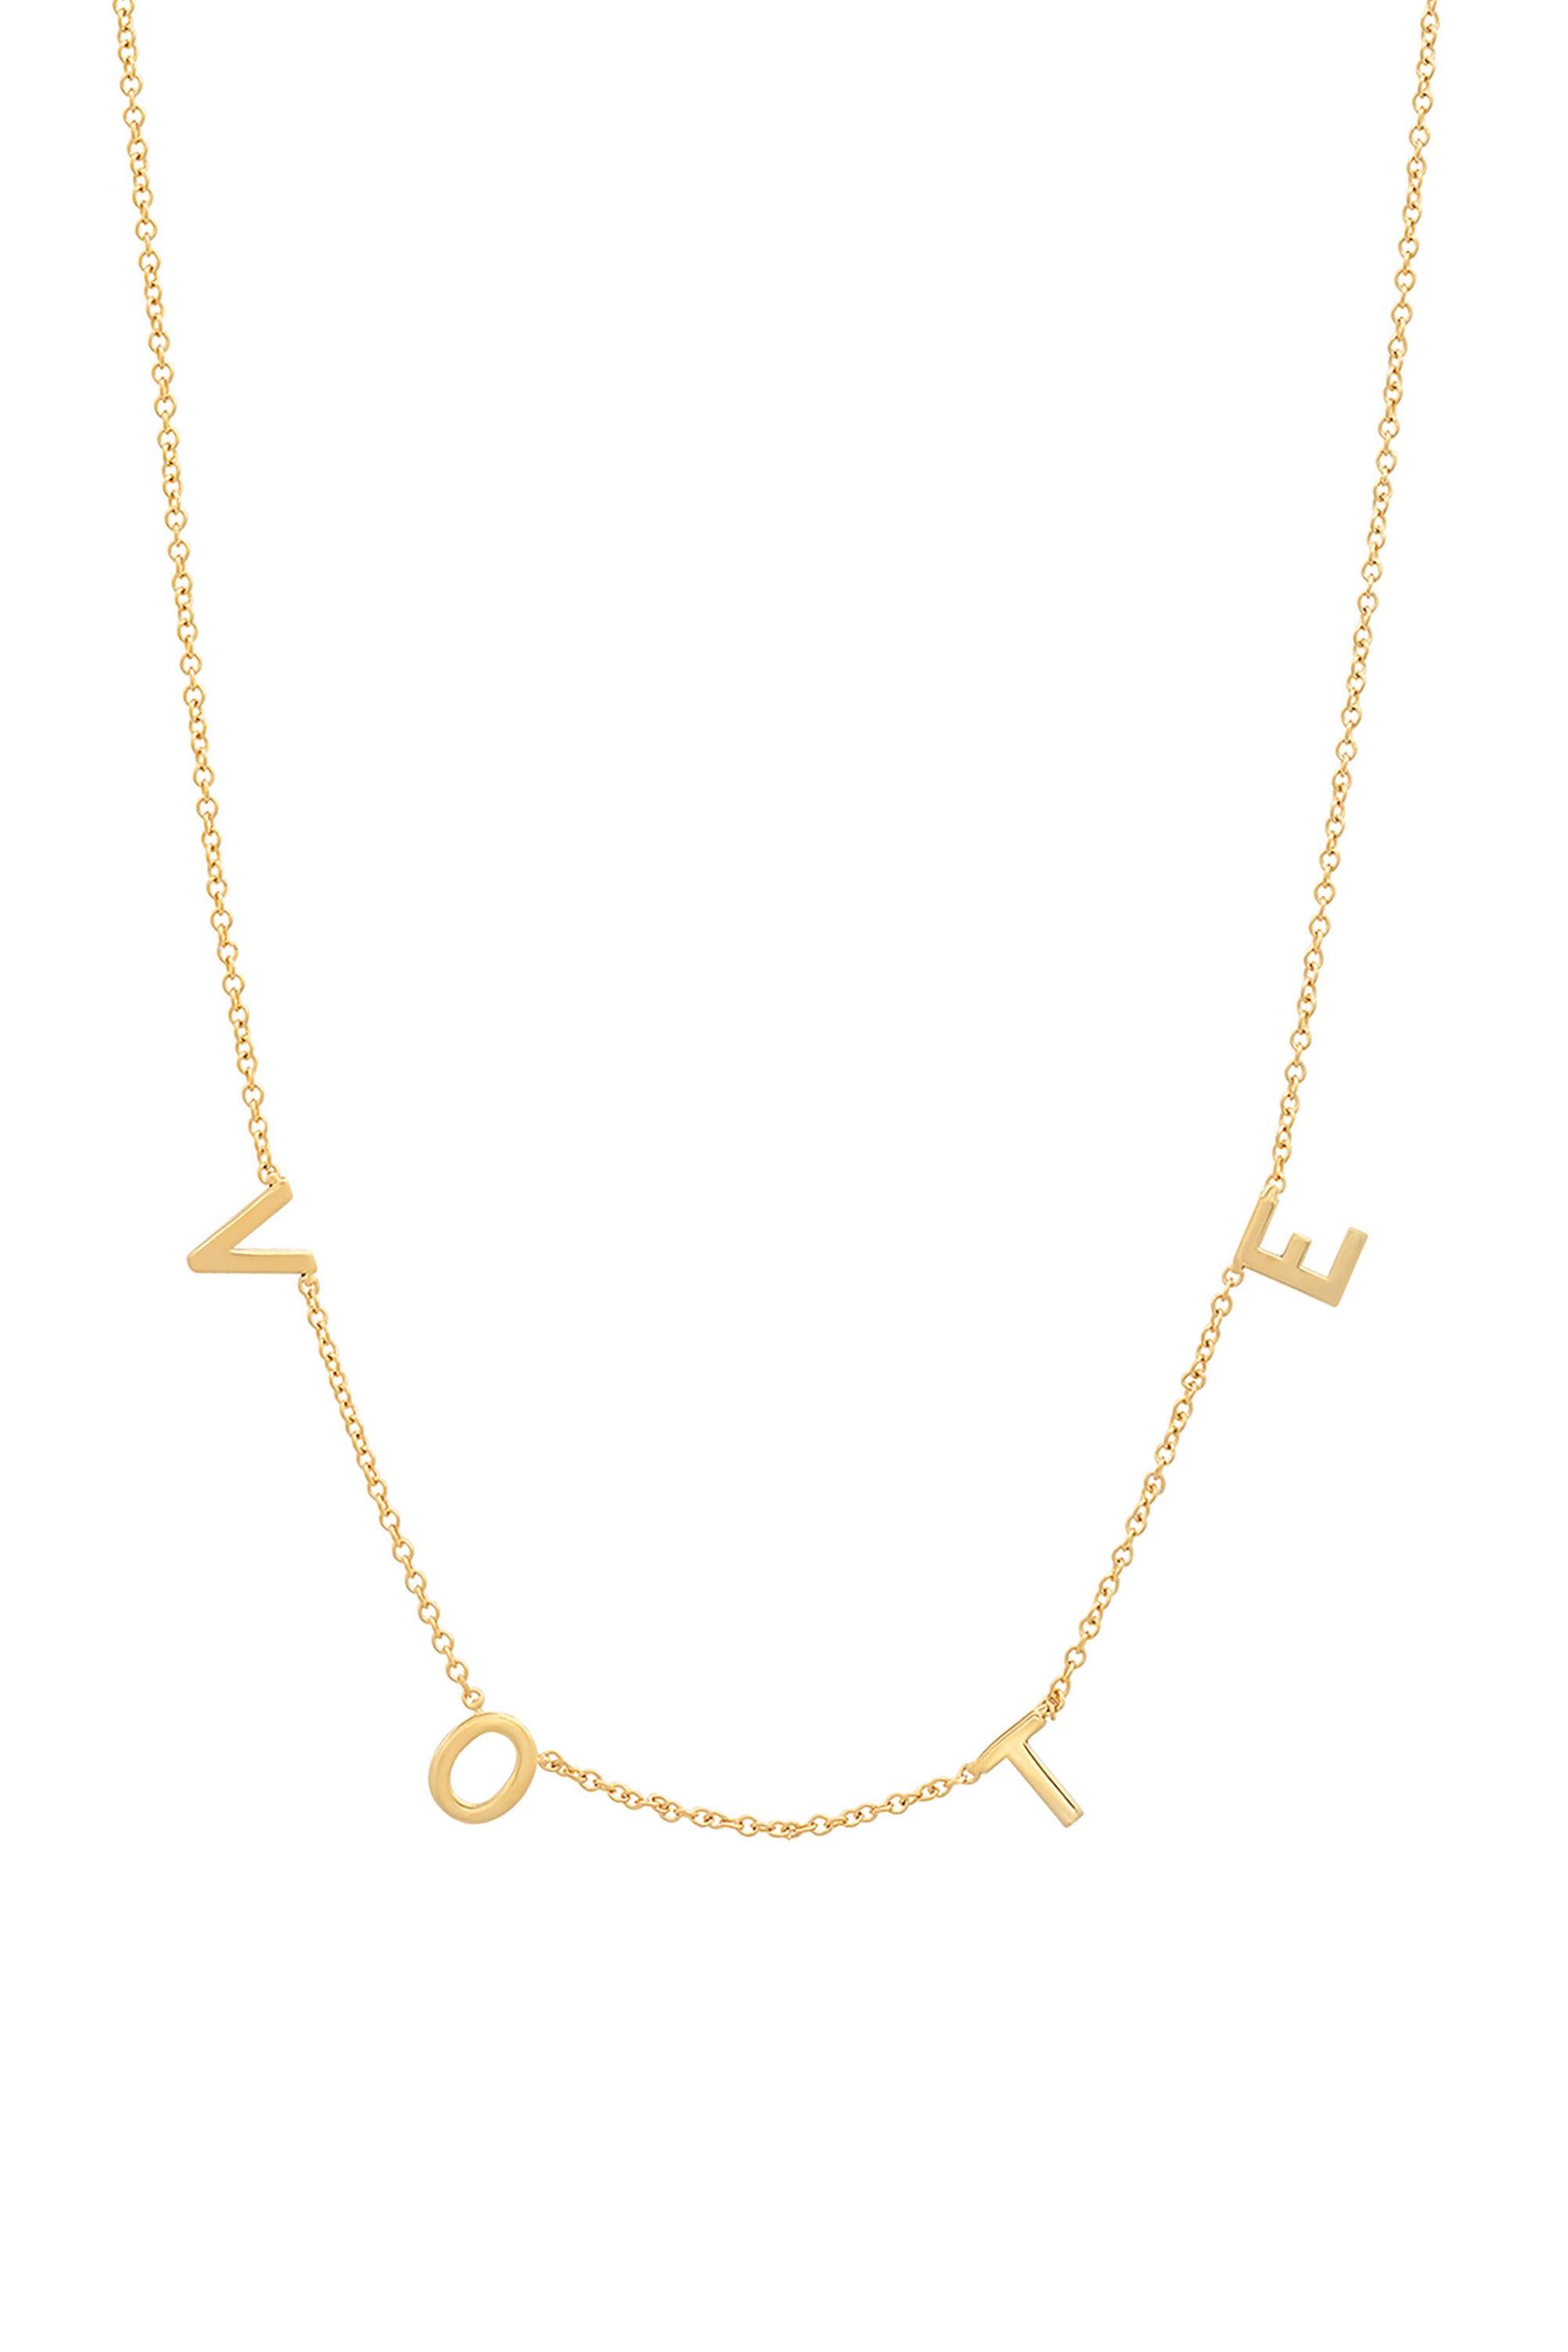 Chunky Gold Link Chain Necklace Bold Statement Necklace Pearl Chokers  Custom Monogram Initial Pin Engraved Jewelry